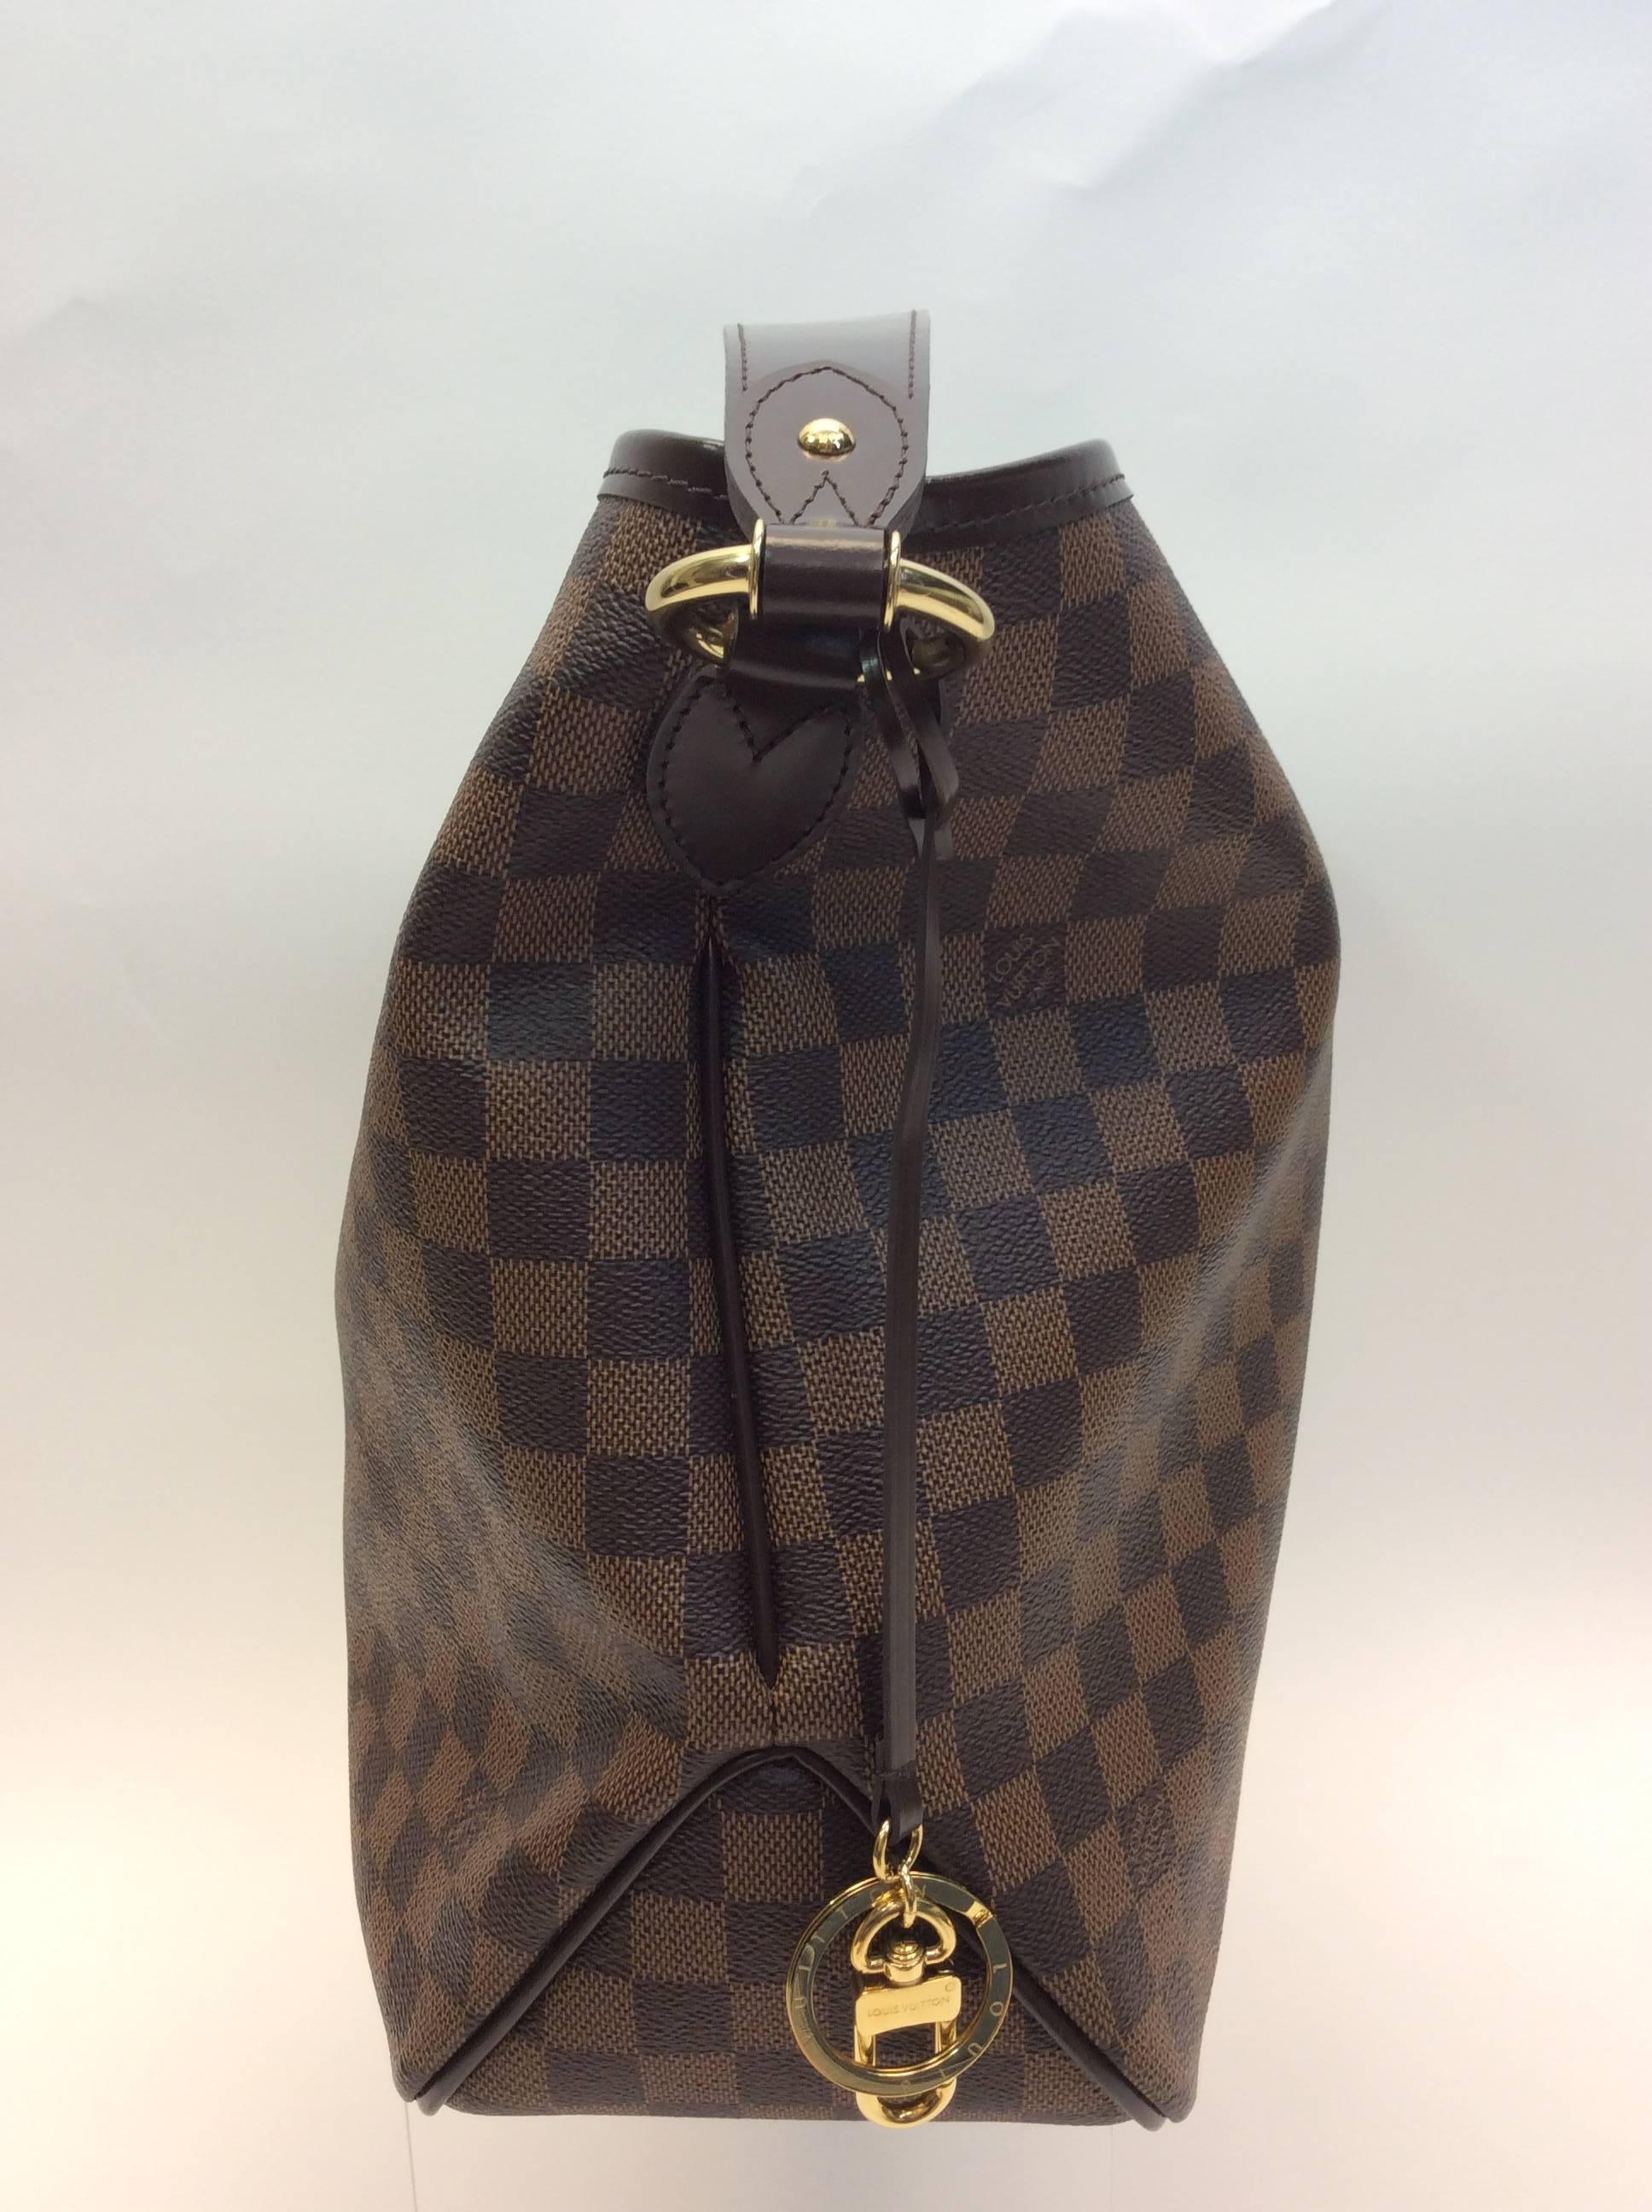 Louis Vuitton Damier Checkered Shoulderbag 
In mint condition!
Leather
$1299
Made in U.S.A.
16